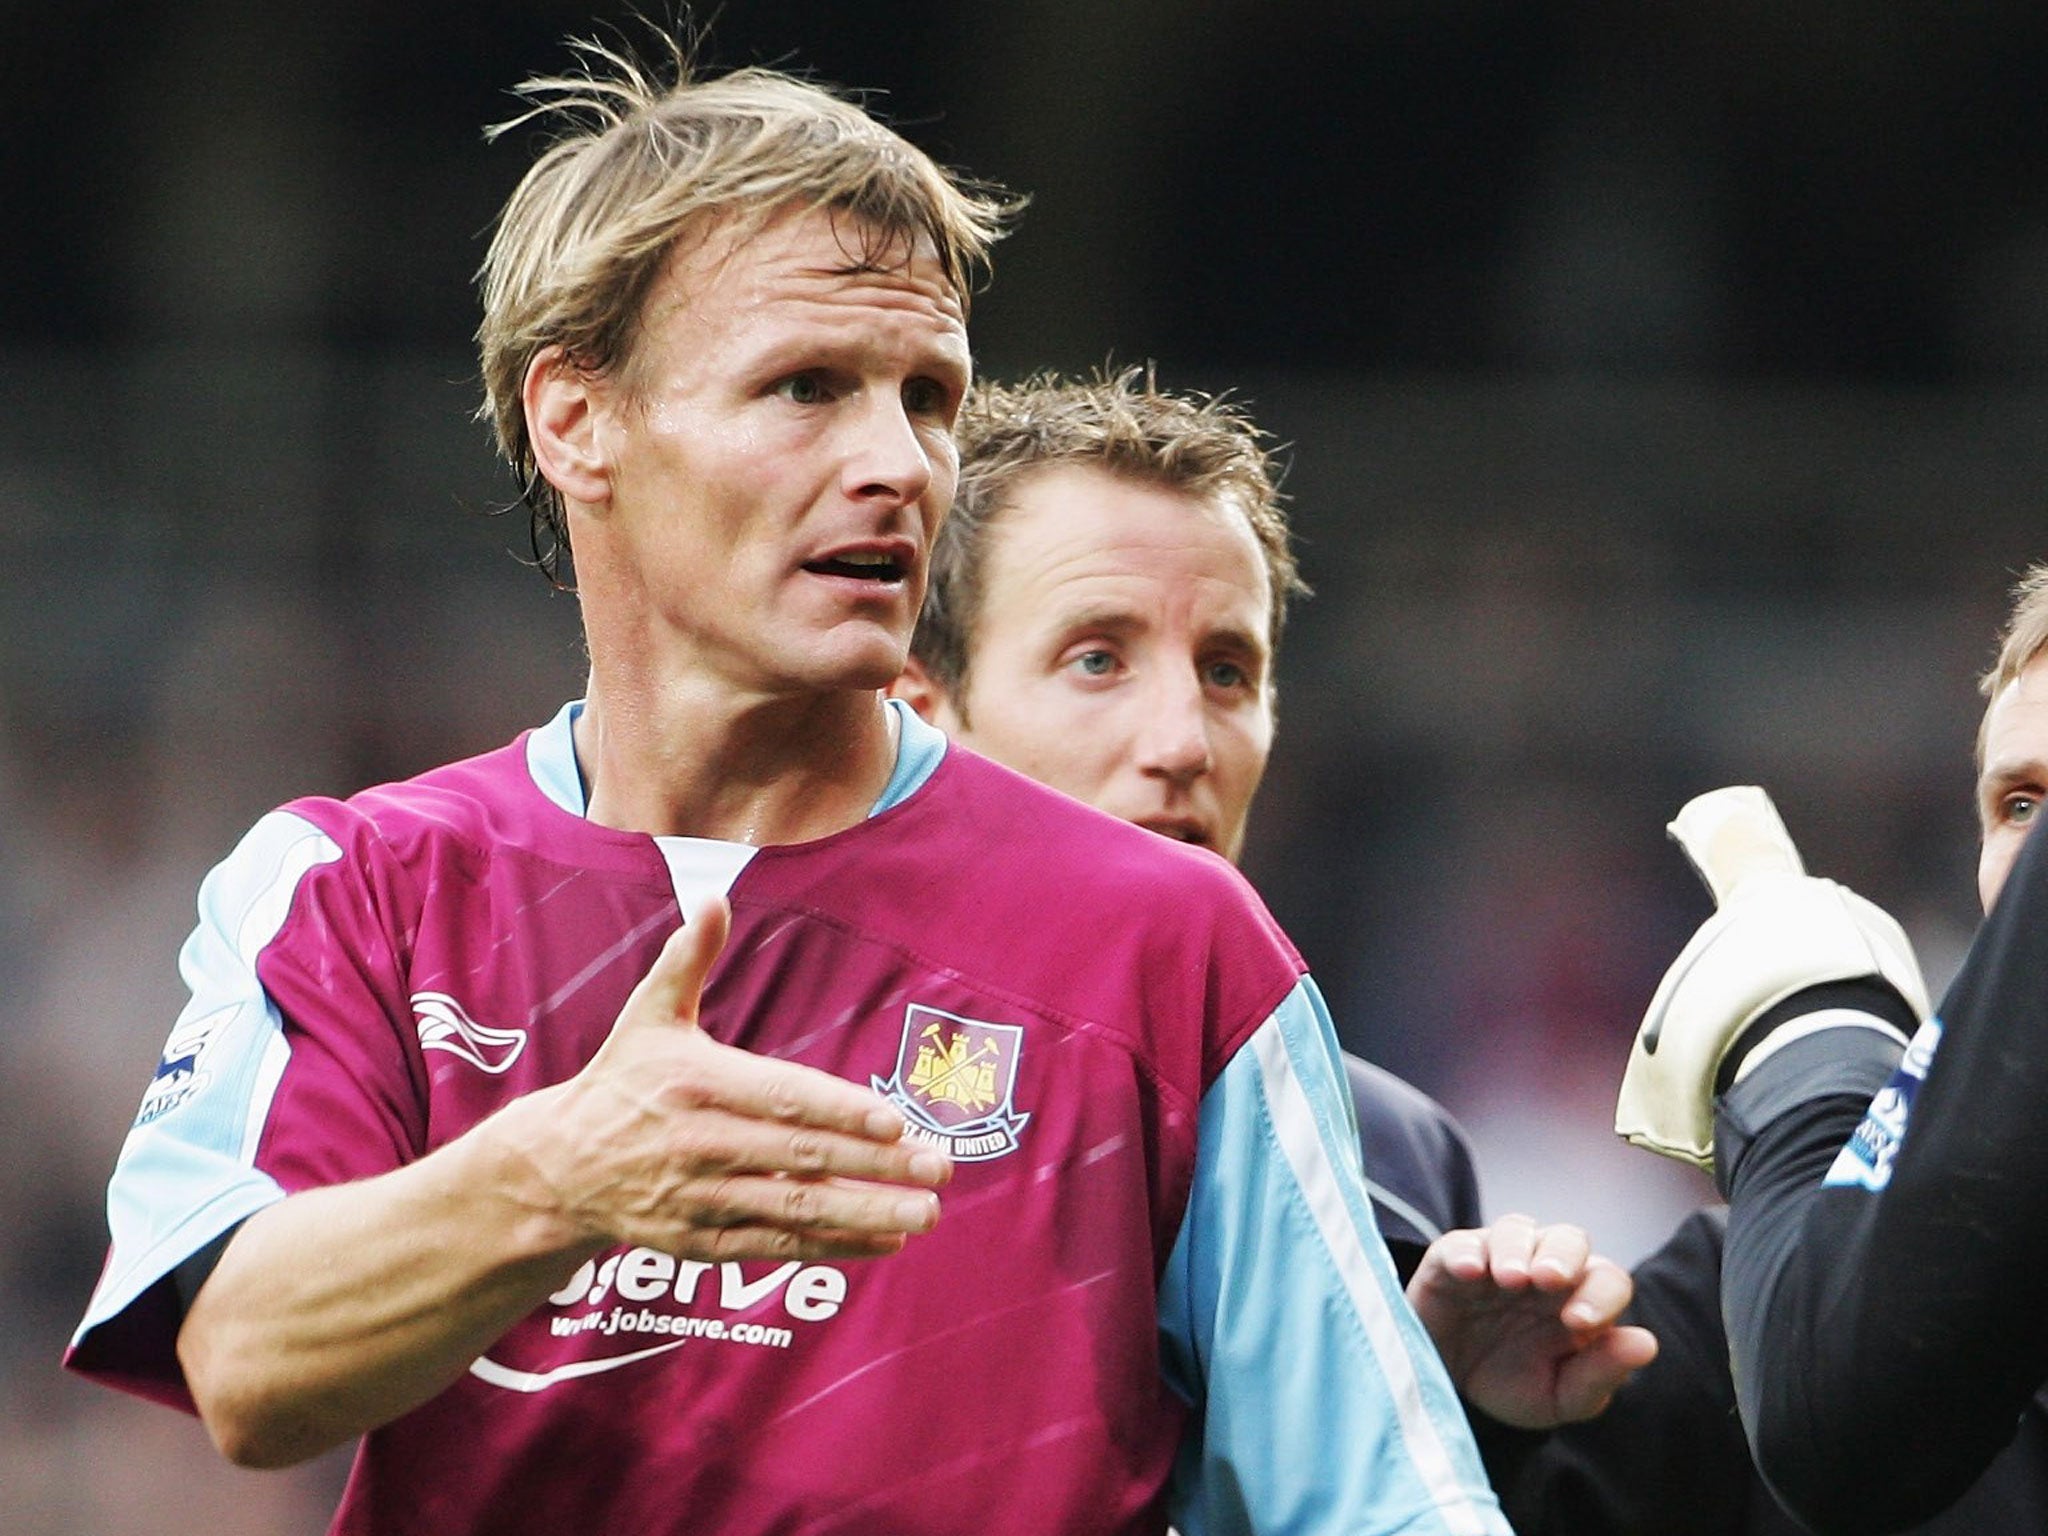 Teddy Sheringham is another famous veteran